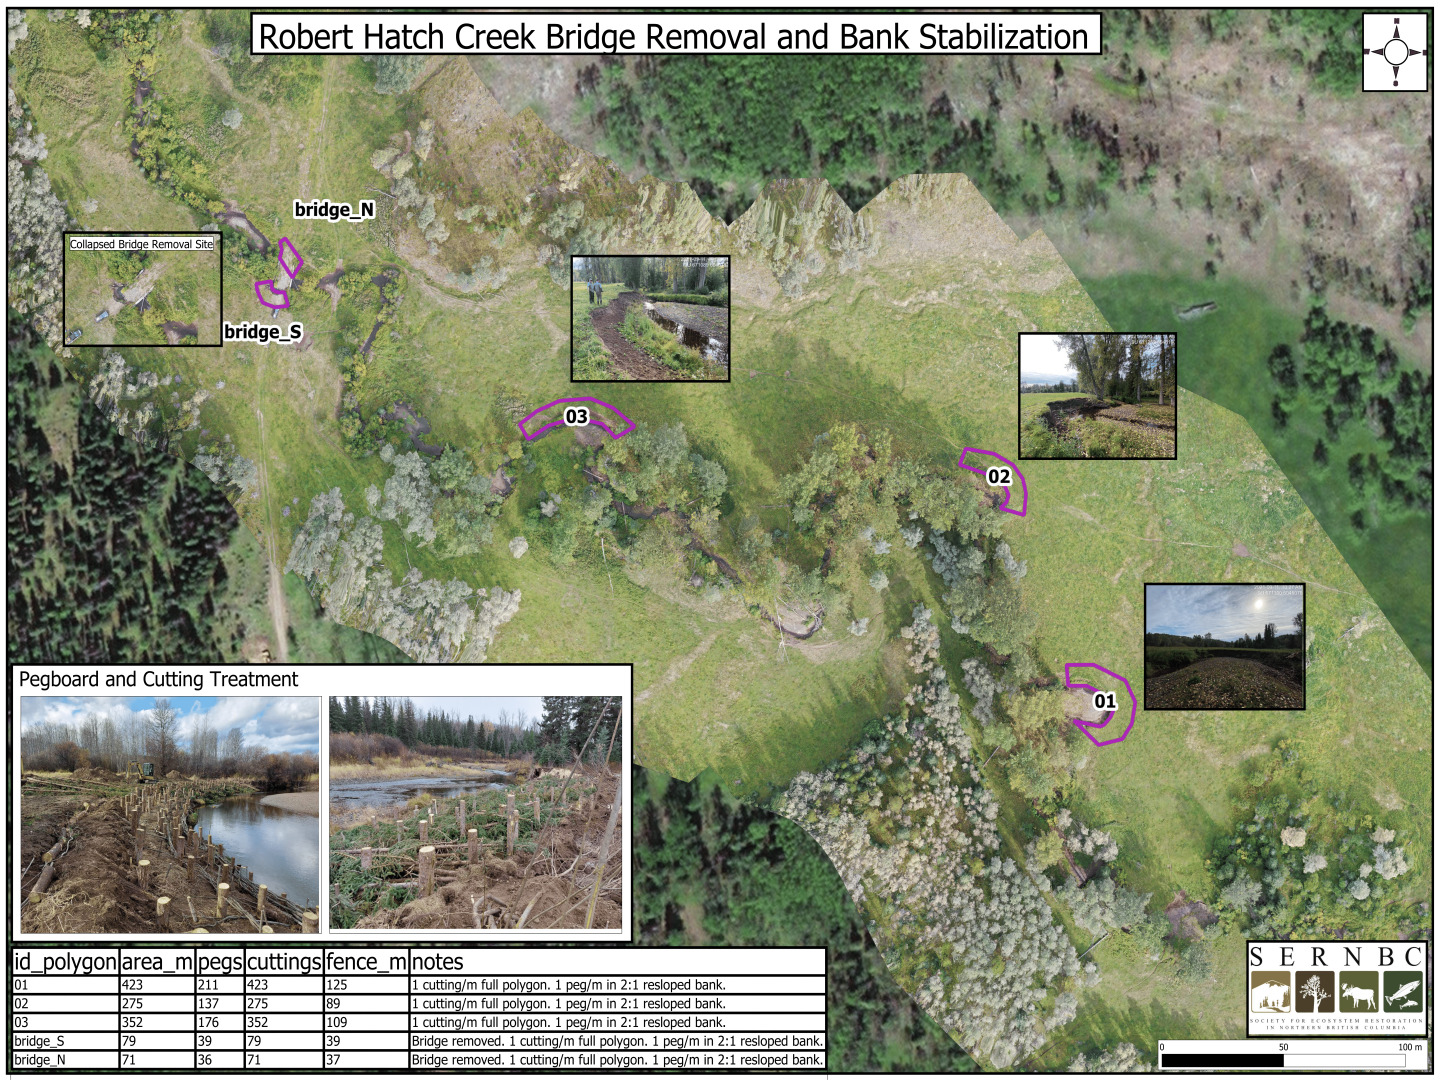 Restoration plan for Robert Hatch Creek including removal of collapsed bridge, resloping of banks and the installation of live cuttings/pegboarding